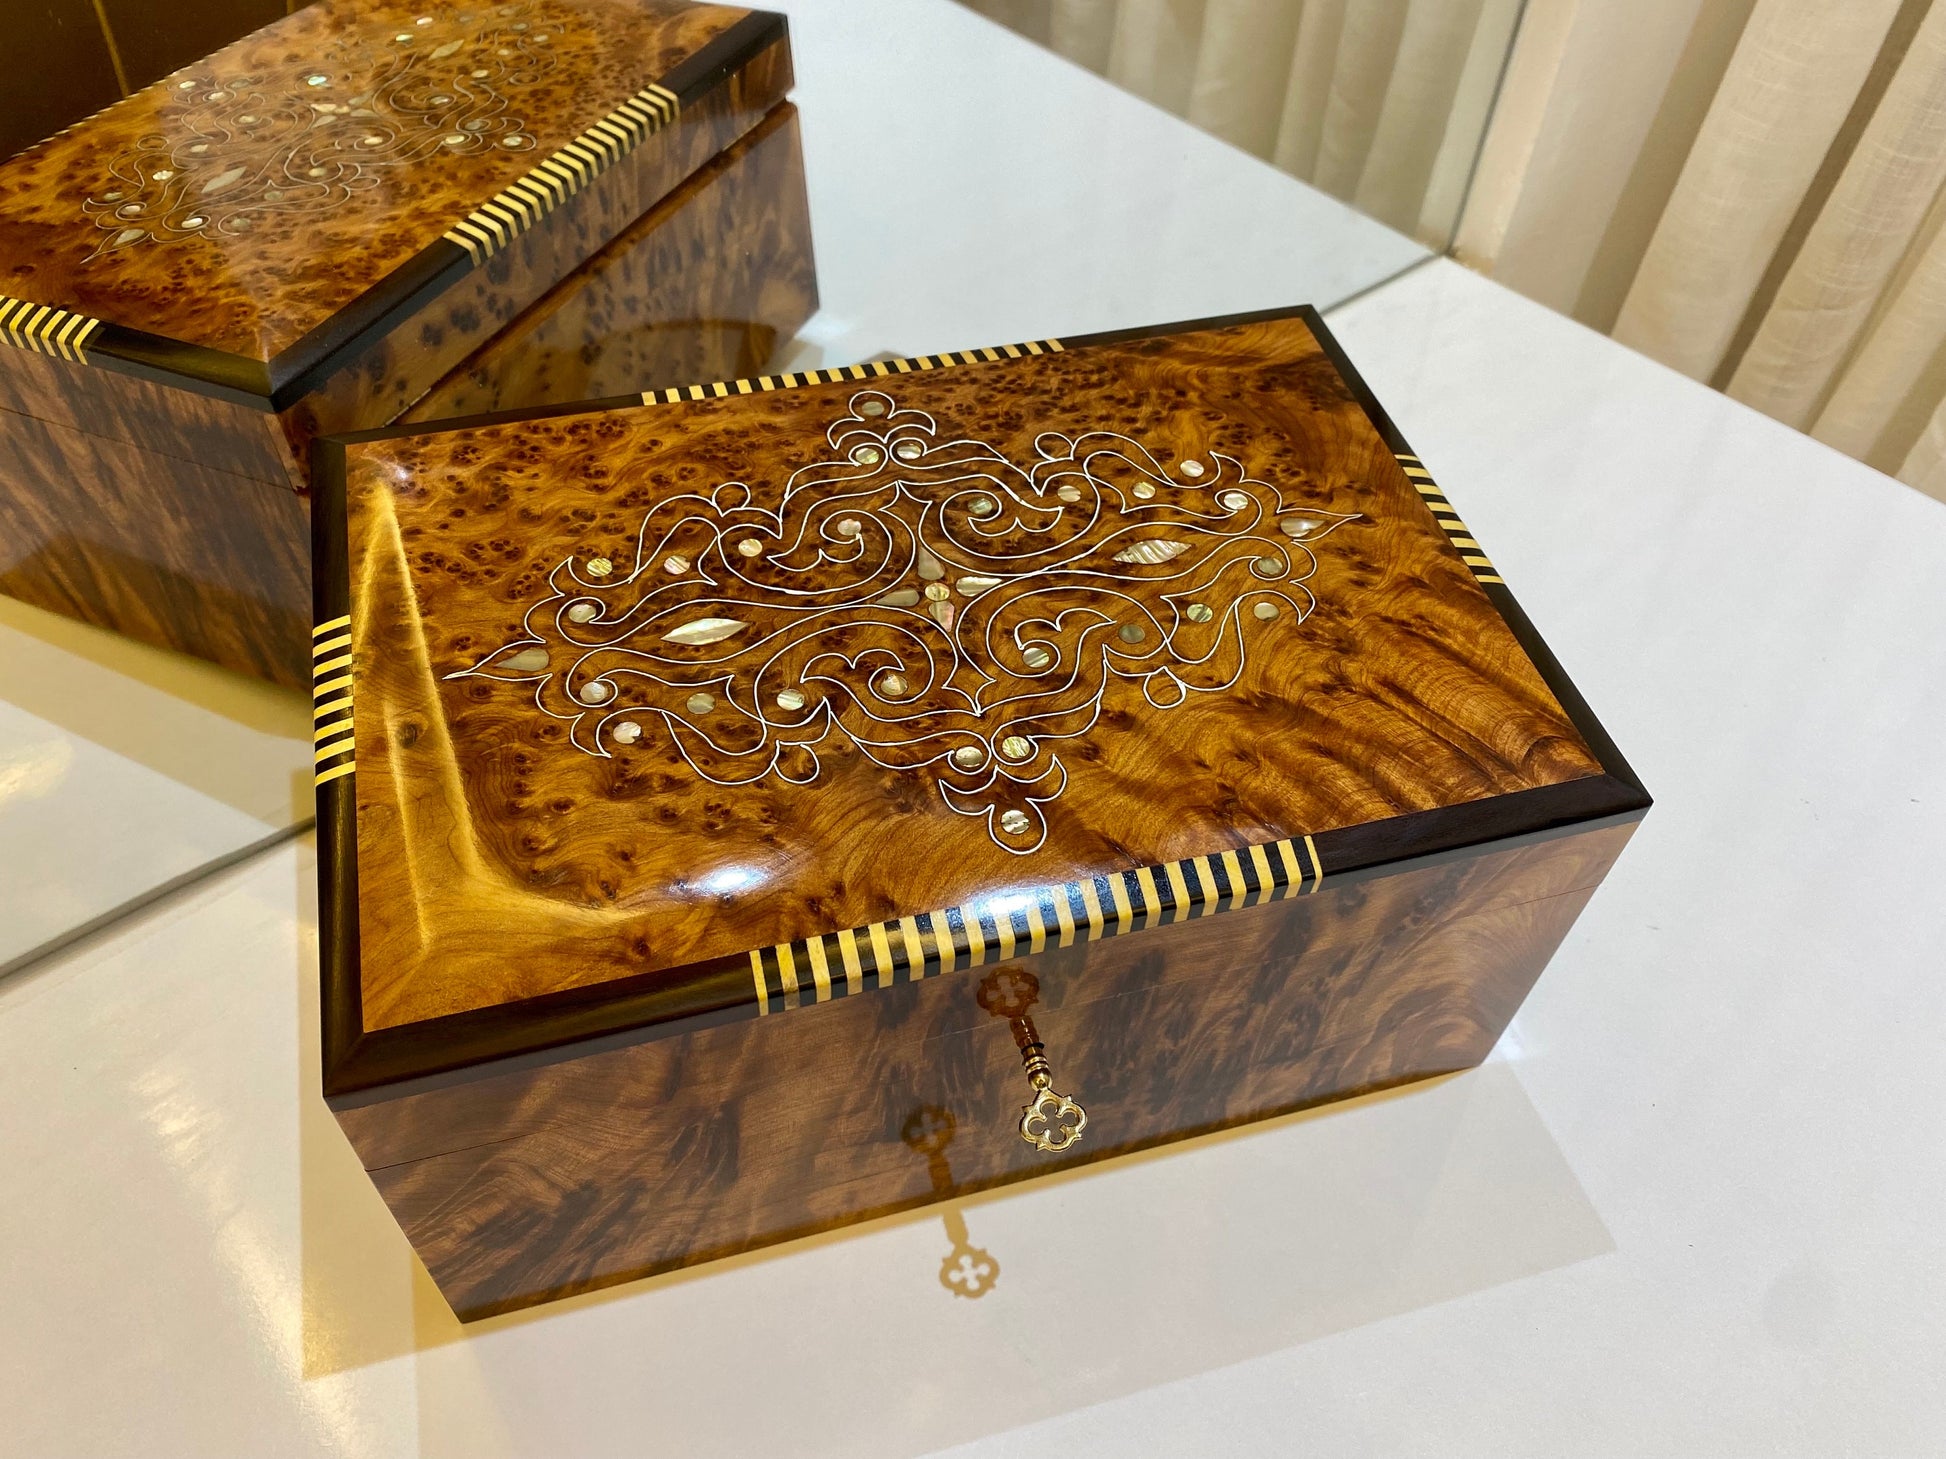 10"x6" Morrocan juniper jewellery Box wood engraved with mother of pearls,lemon and brass inlay,lockable wooden jewelry vintage Box with key